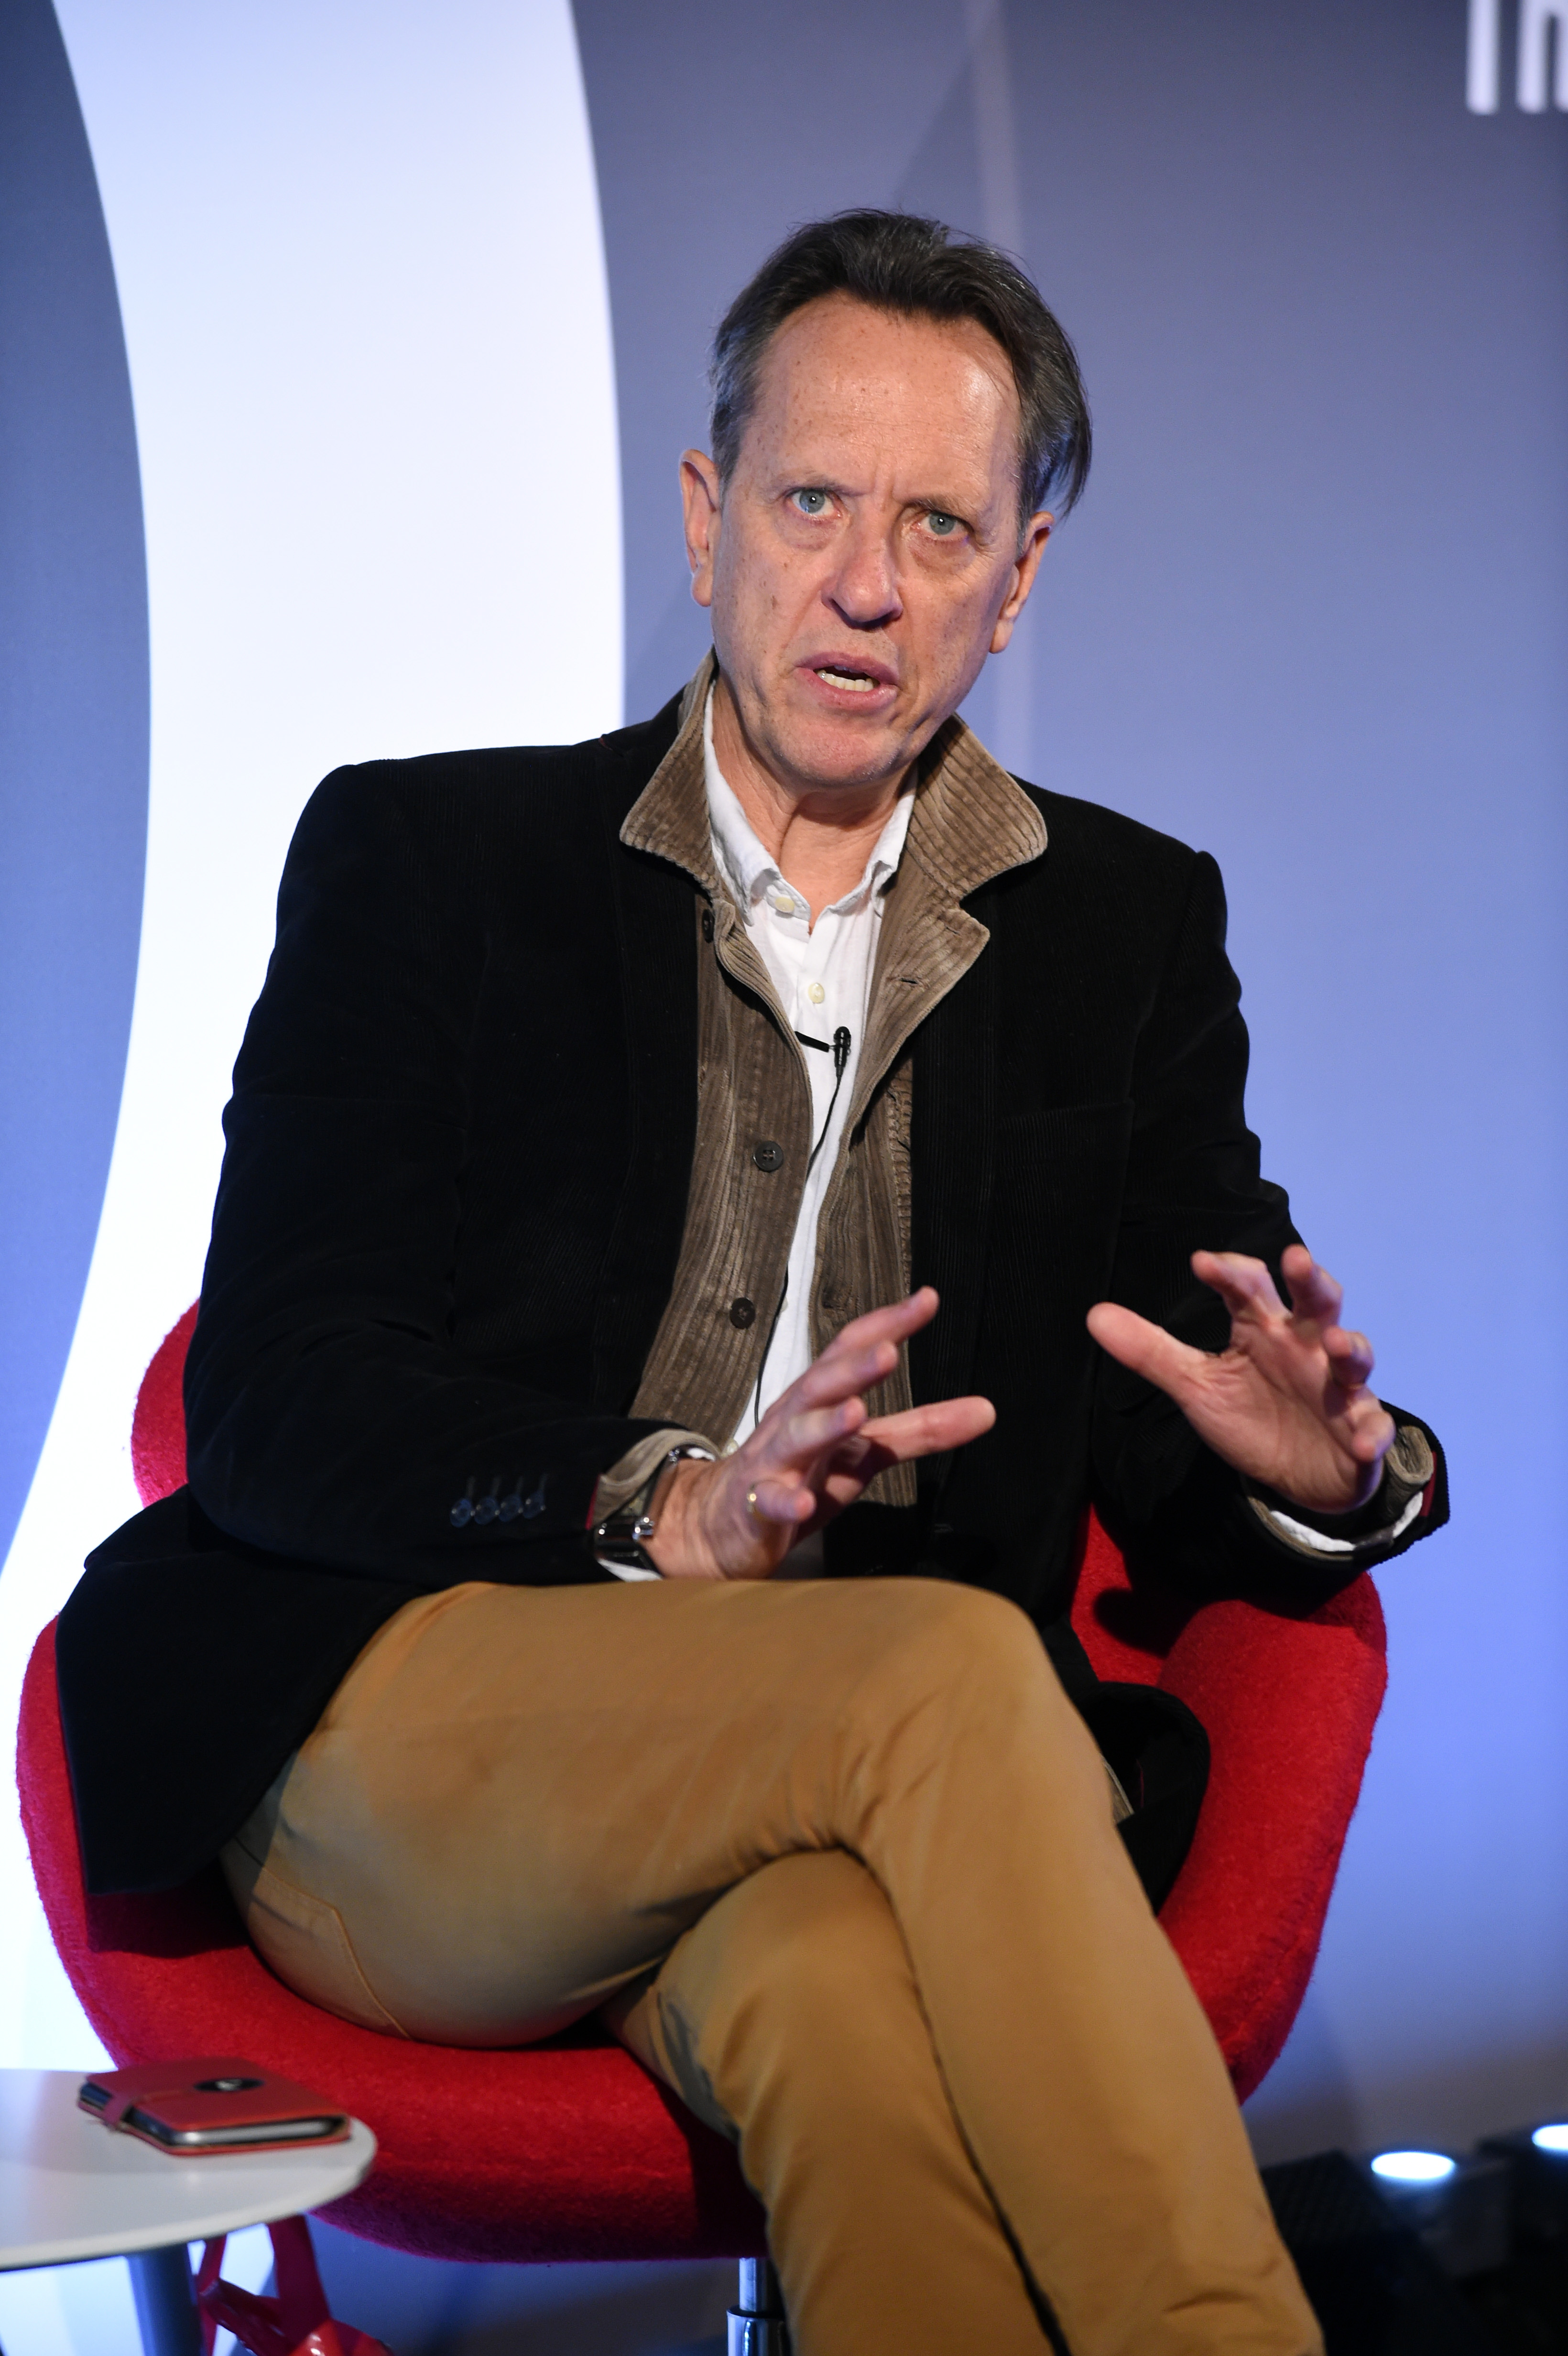 Confessions Of A Perfumed Ponce*: A Conversation with Richard E Grant seminar, Advertising Week Europe 2017, Shutterstock Stage, Picturehouse Central, London, UK